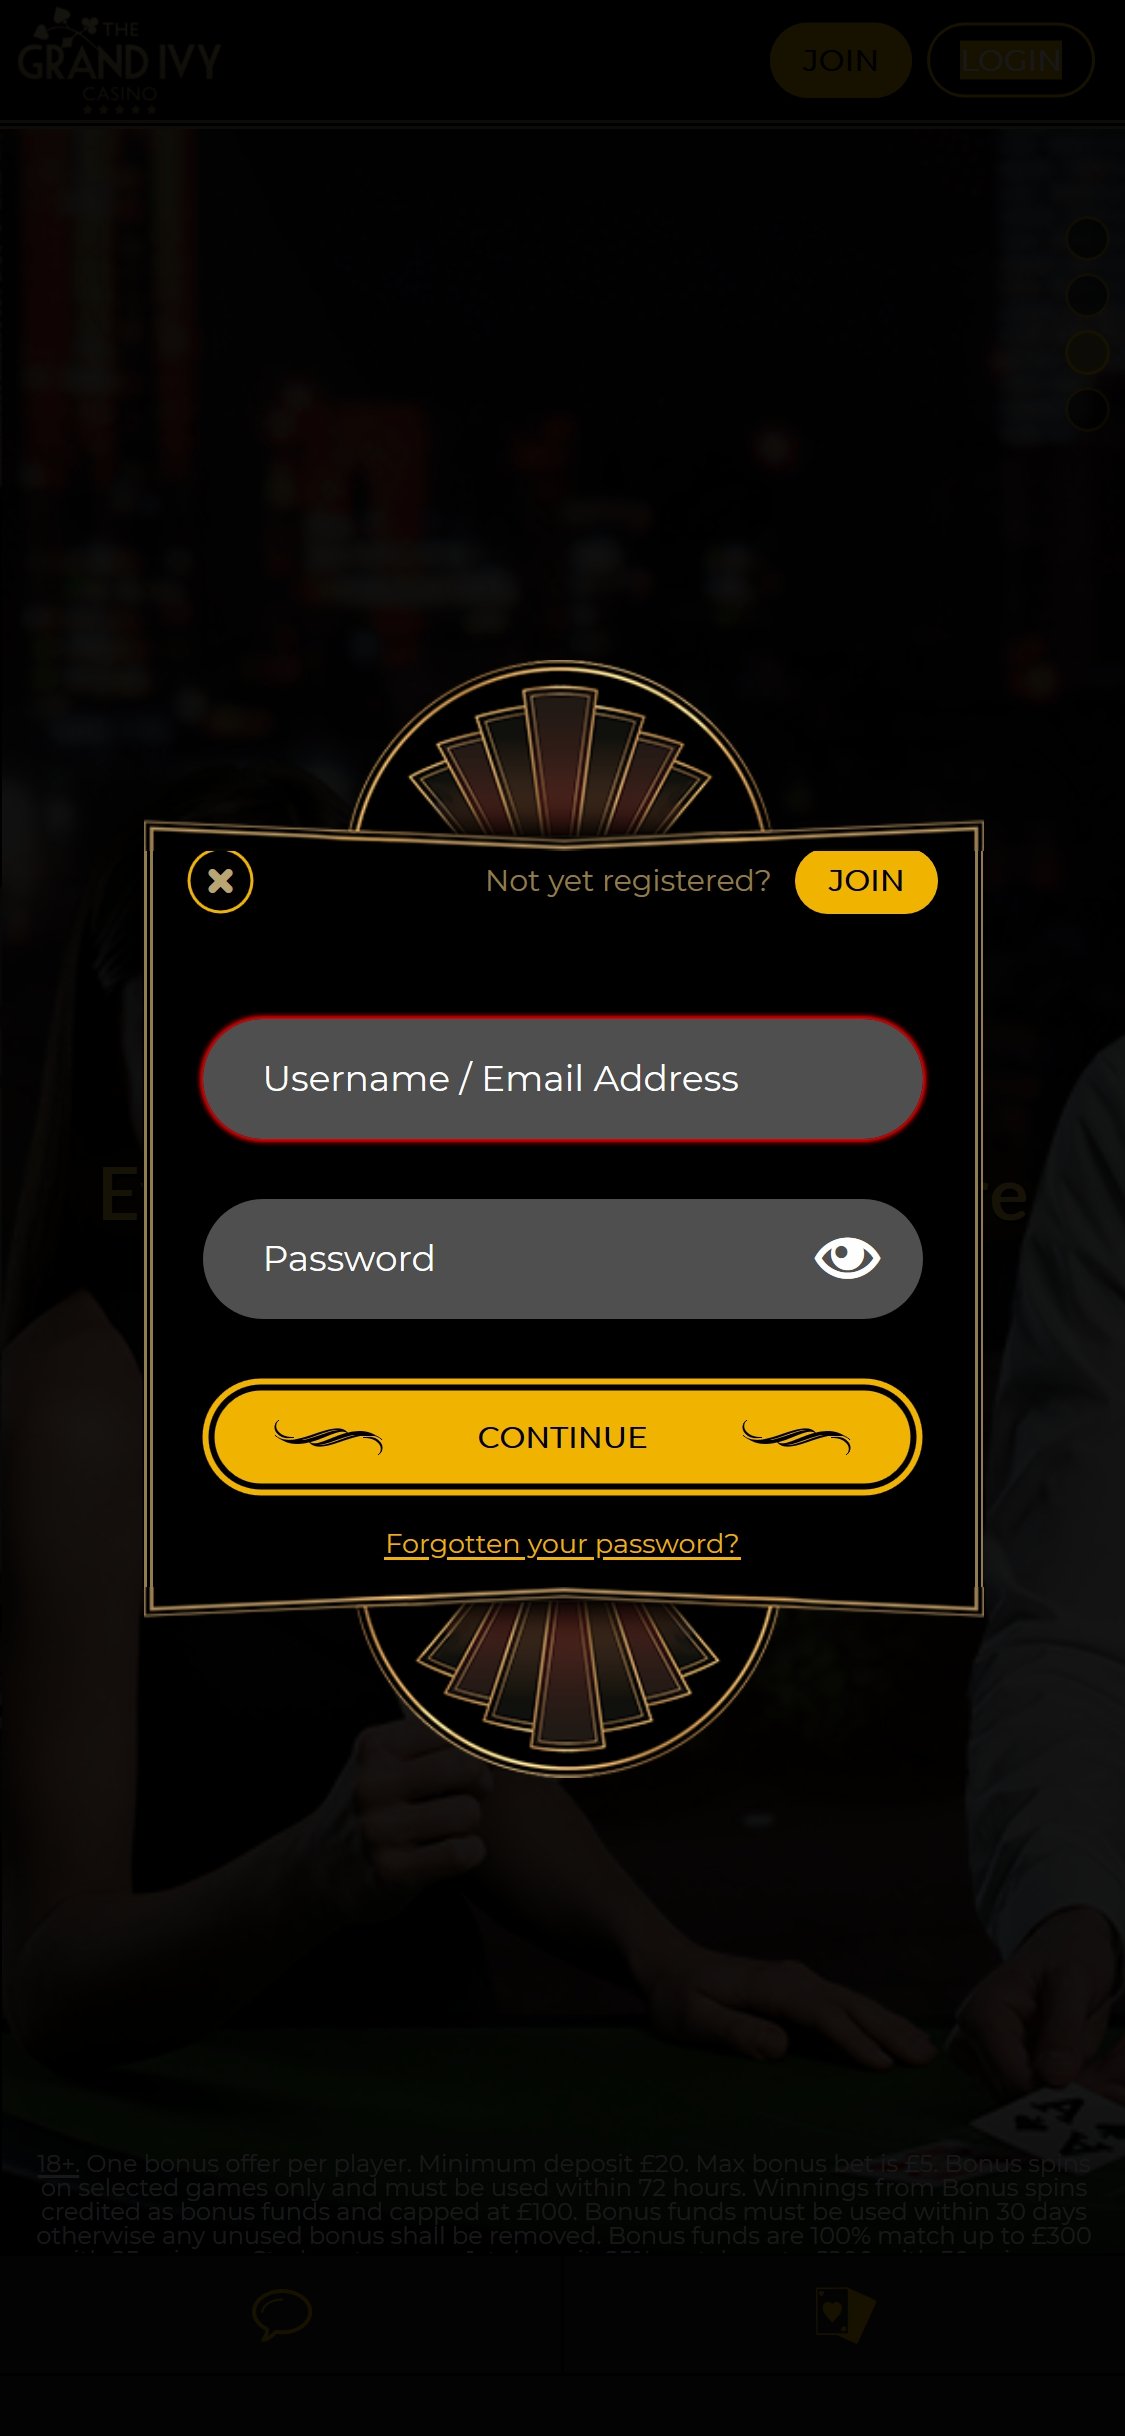 Grand Ivy Casino Mobile Login Review